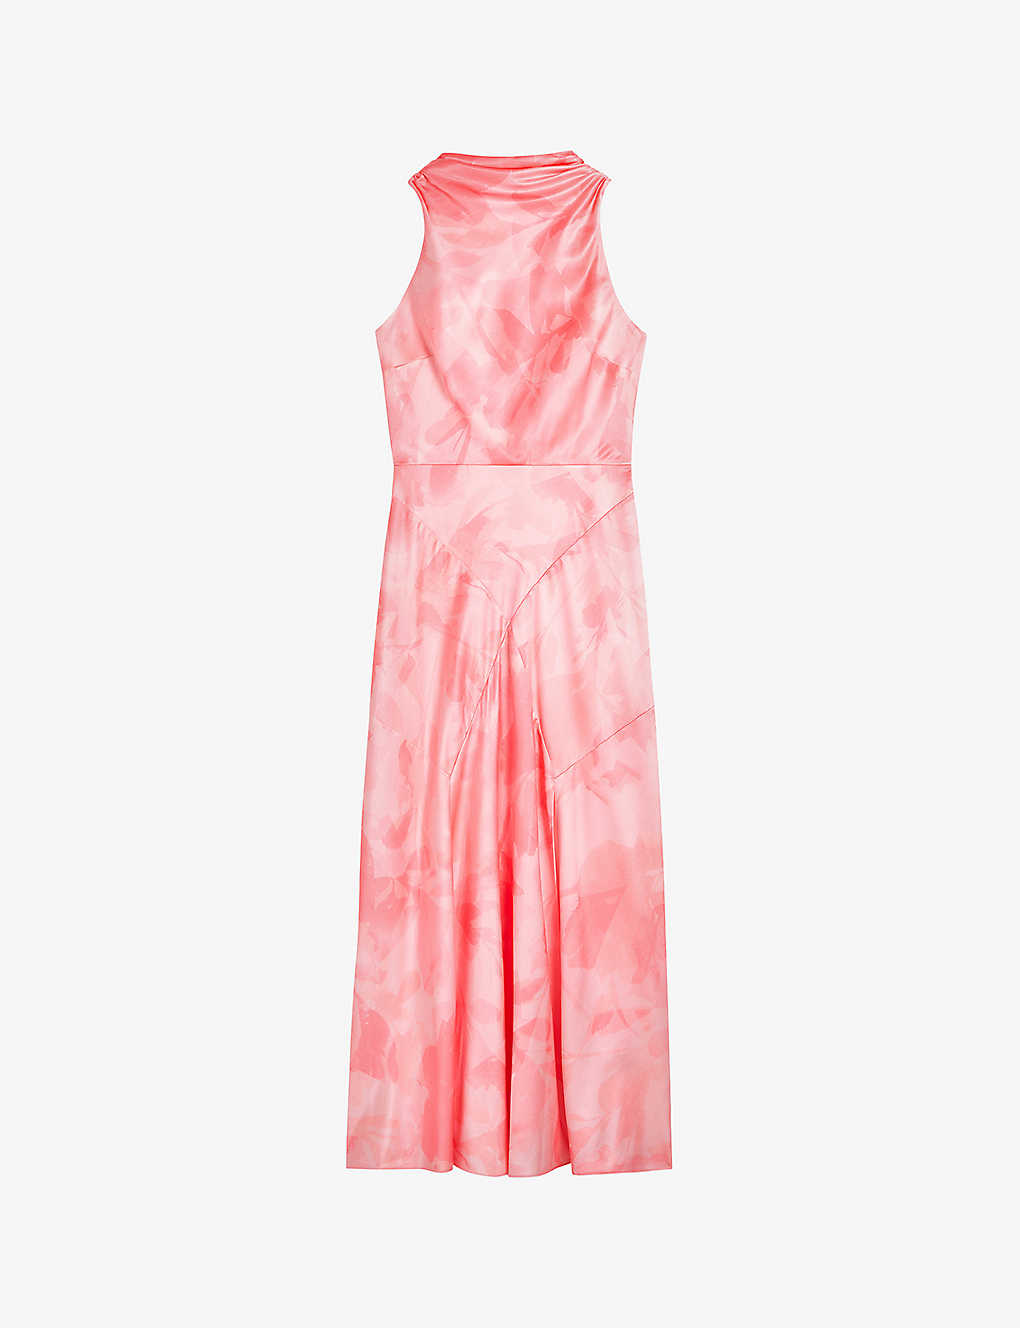 TED BAKER TED BAKER WOMEN'S CORAL LILYMAY FLORAL-PRINT SATIN MIDI DRESS,66176535